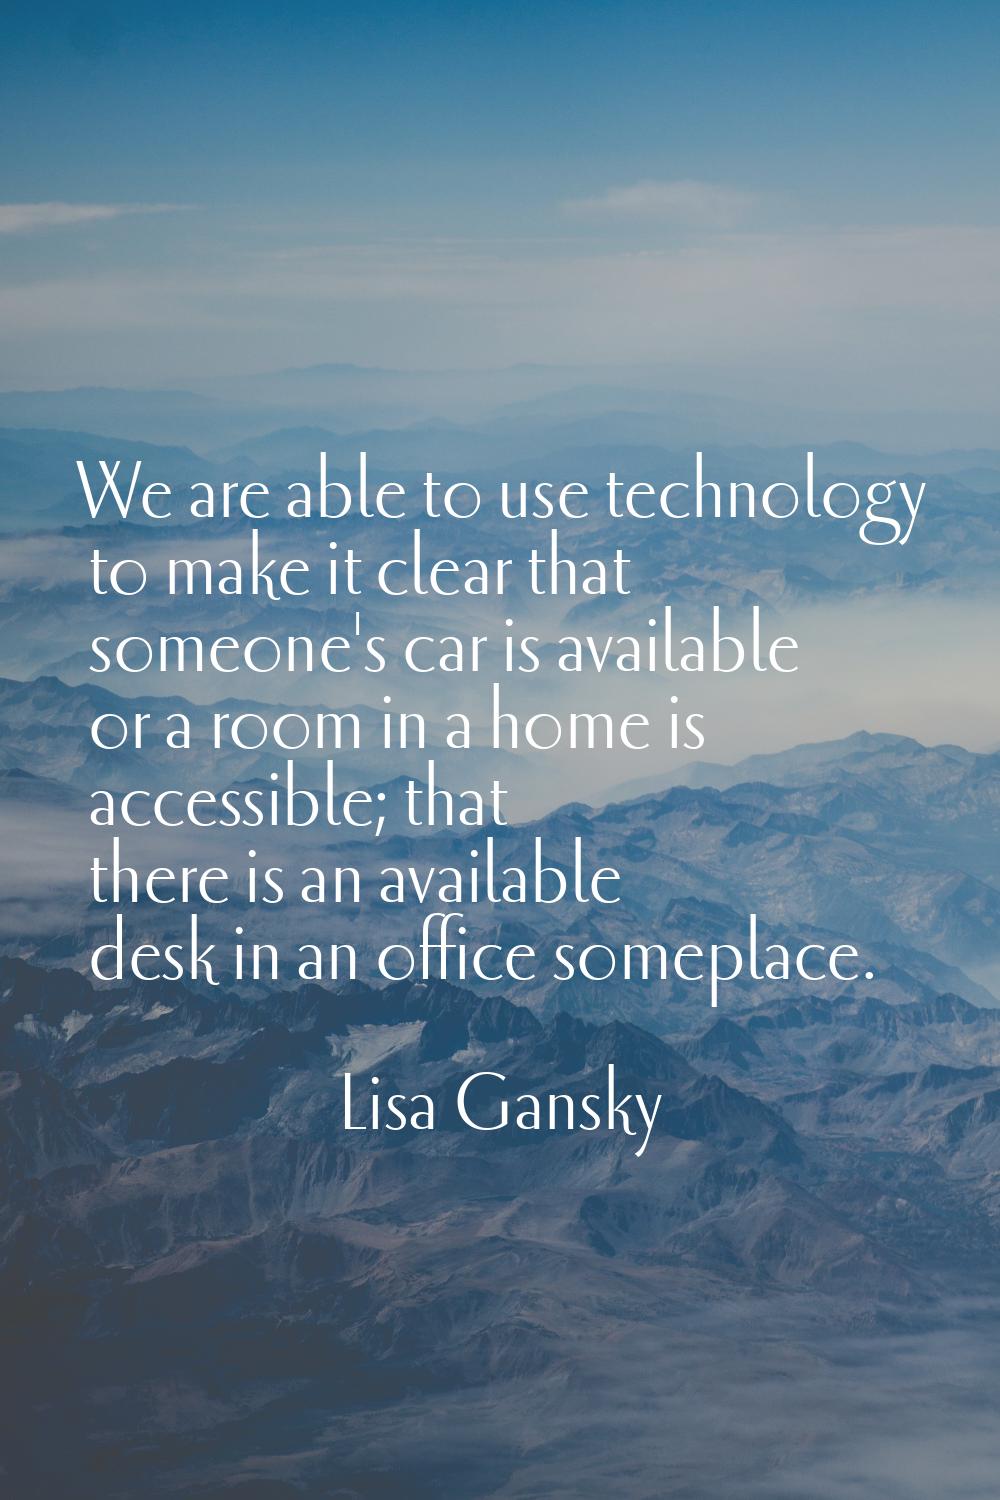 We are able to use technology to make it clear that someone's car is available or a room in a home 